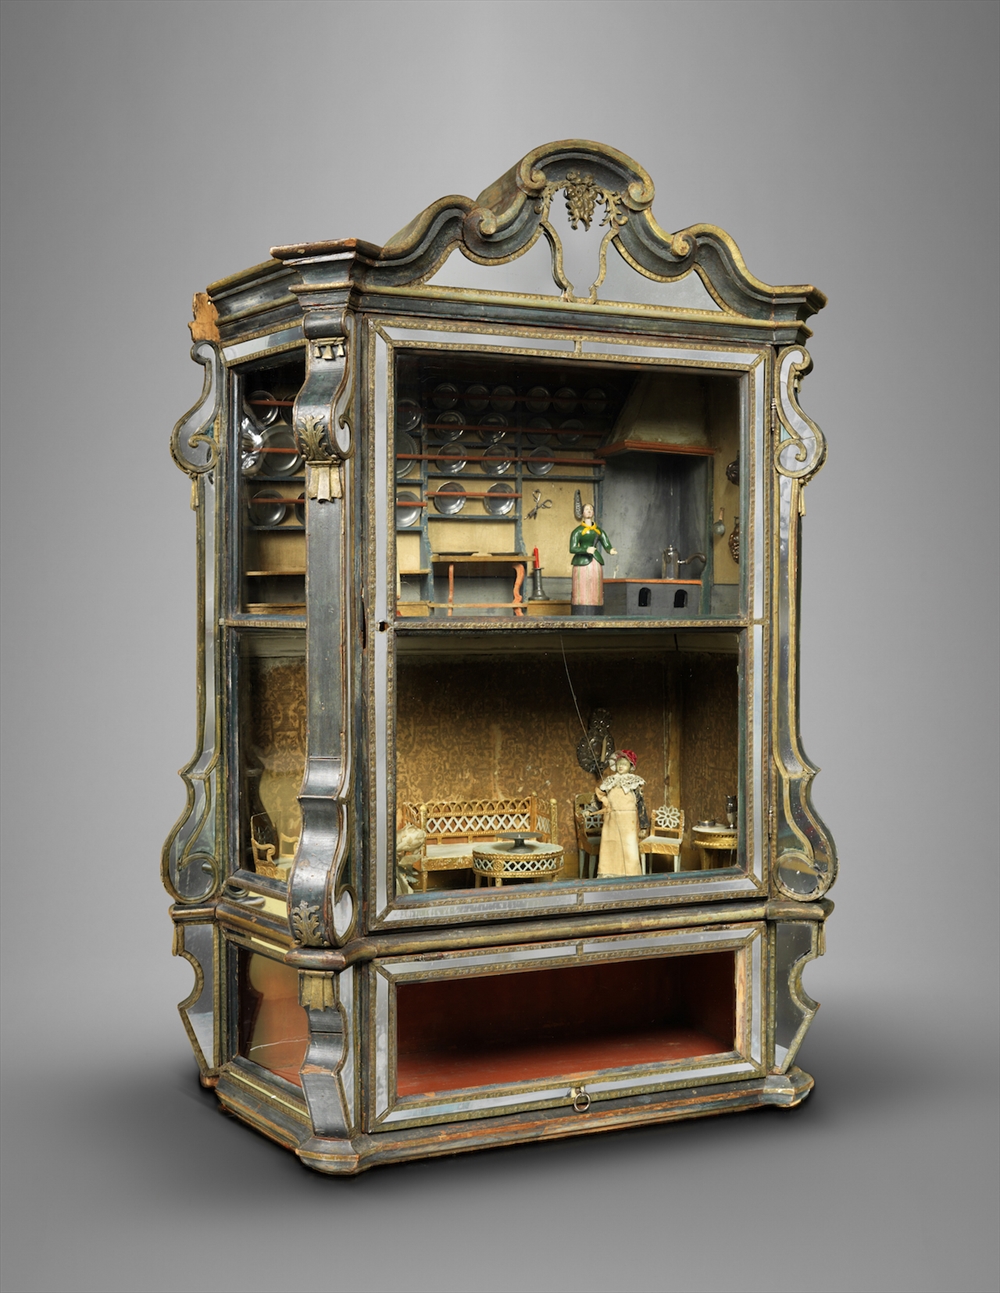 Archisearch - One of the first dollhouses in Scandinavia crafted by Burchard Prech`s atelier, 1686-1690